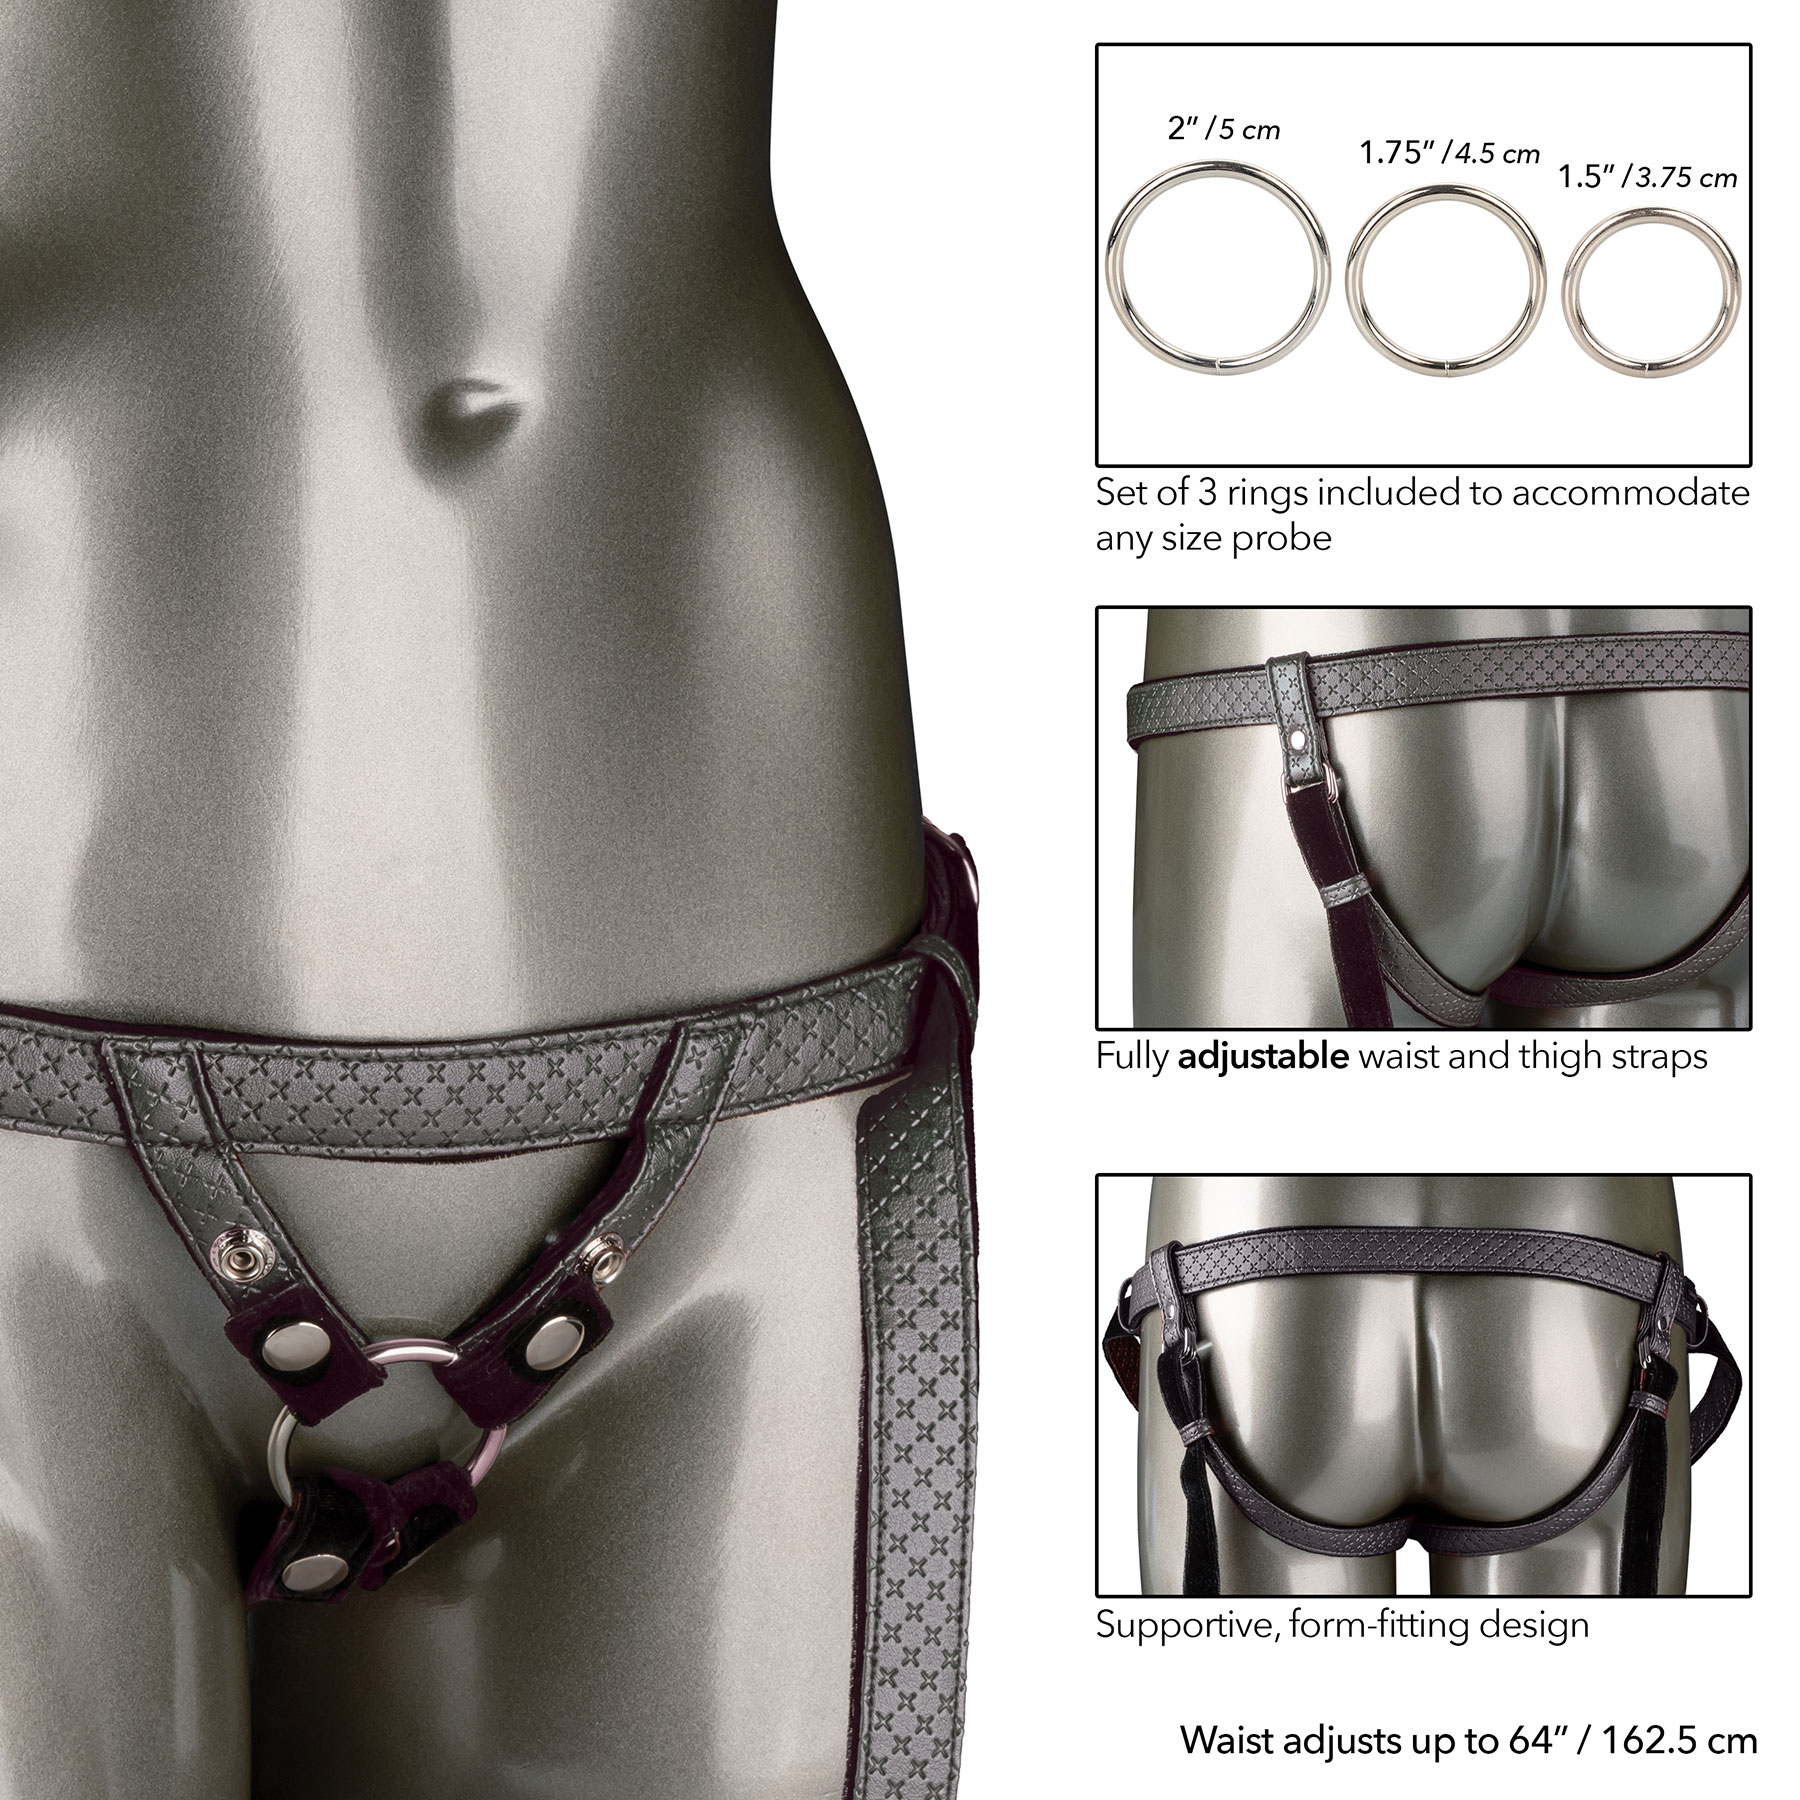 Her Royal Harness The Regal Duchess O-Ring Harness - Details